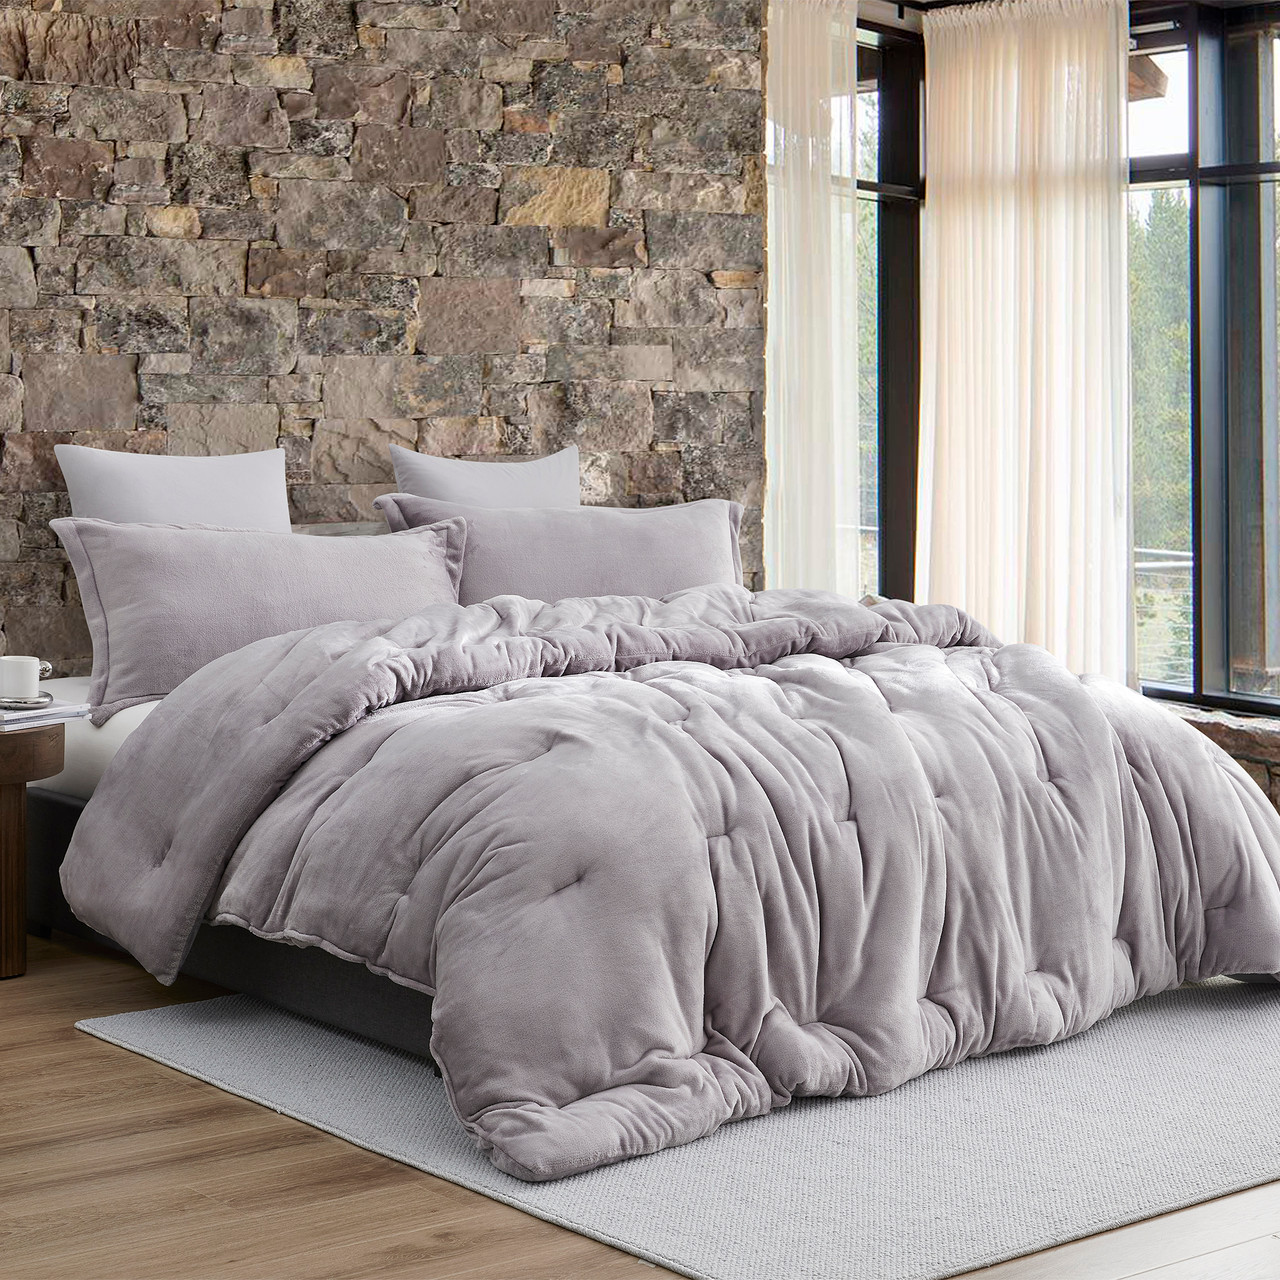 High Quality Dorm Bedding - The Original Plush Coma Inducer Living Coral  Twin XL Comforter with Velvet Pillow Shams